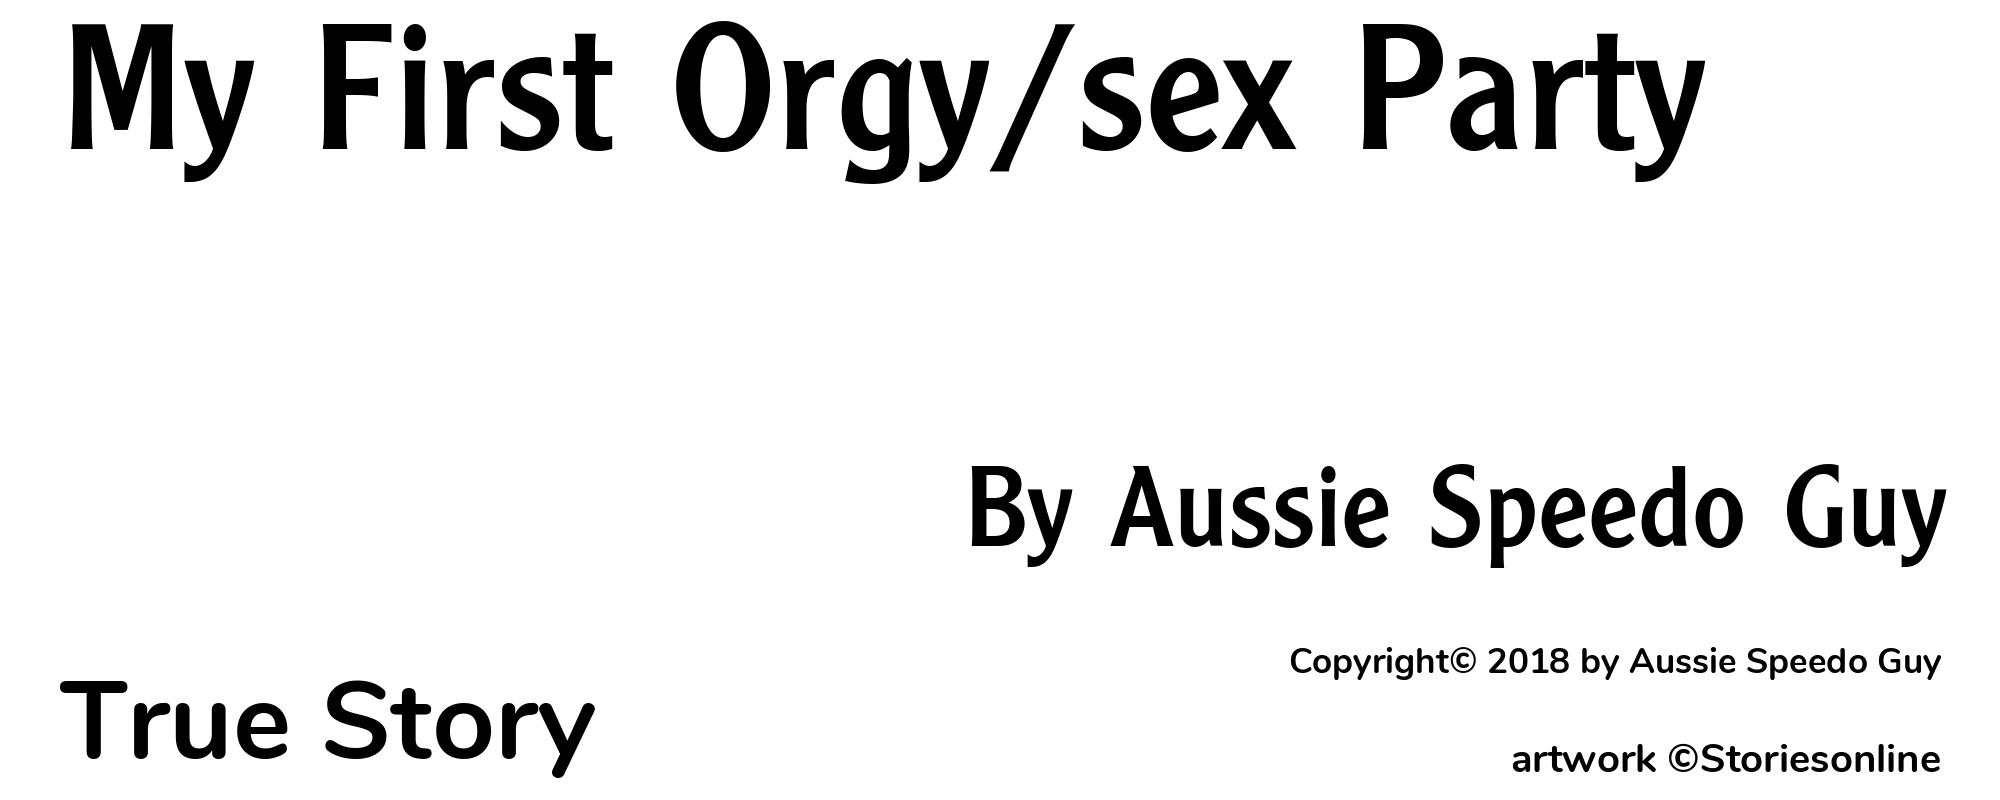 My First Orgy/sex Party - Cover